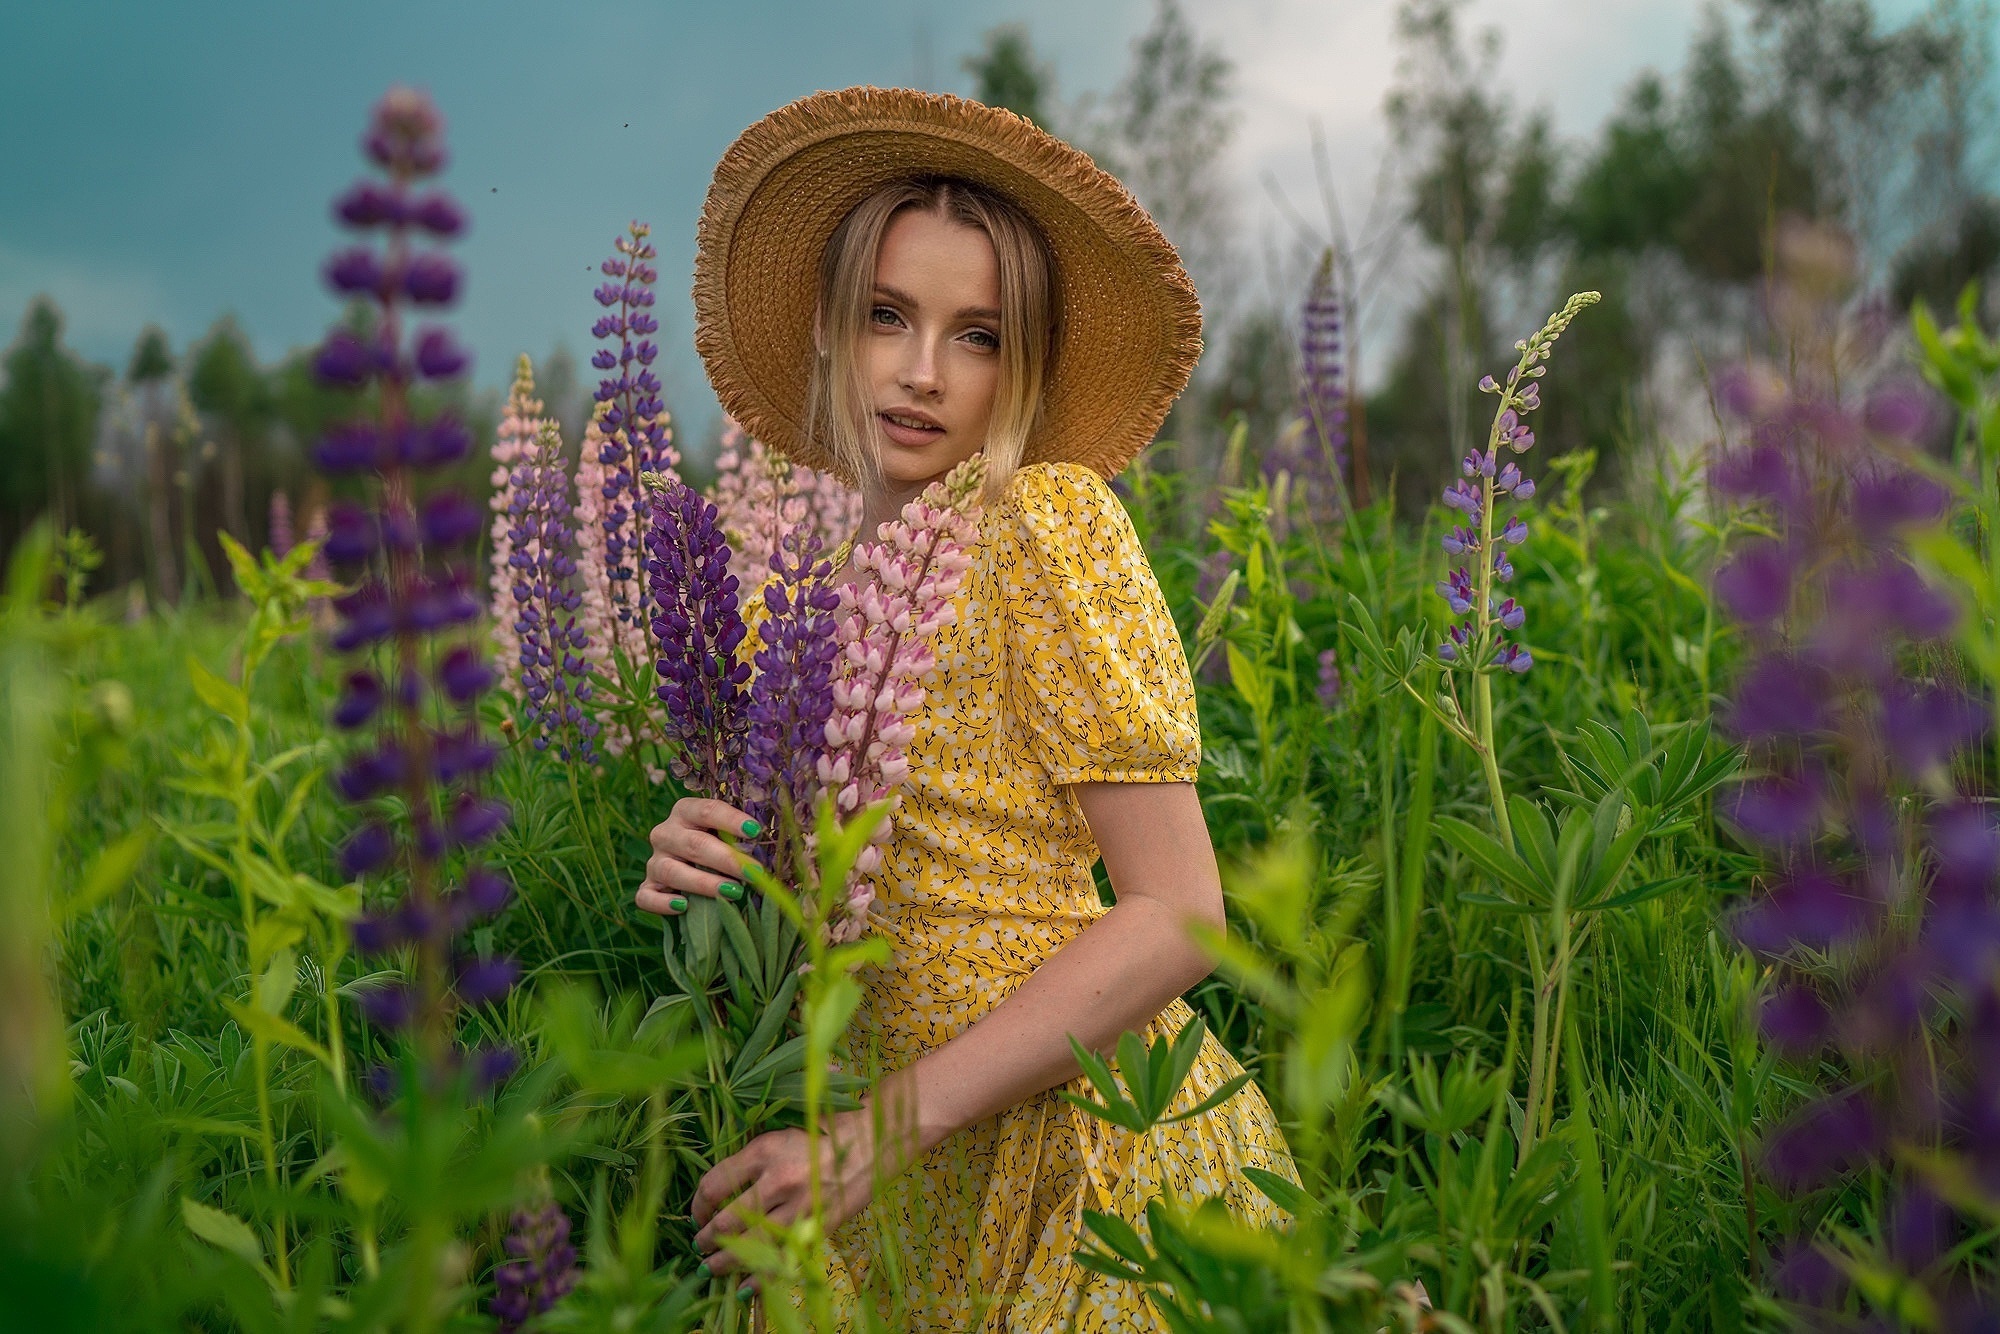 Women Outdoors Women Outdoors Flowers Flower Dress Yellow Dress Blonde Summer Lupine Looking At View 2000x1334